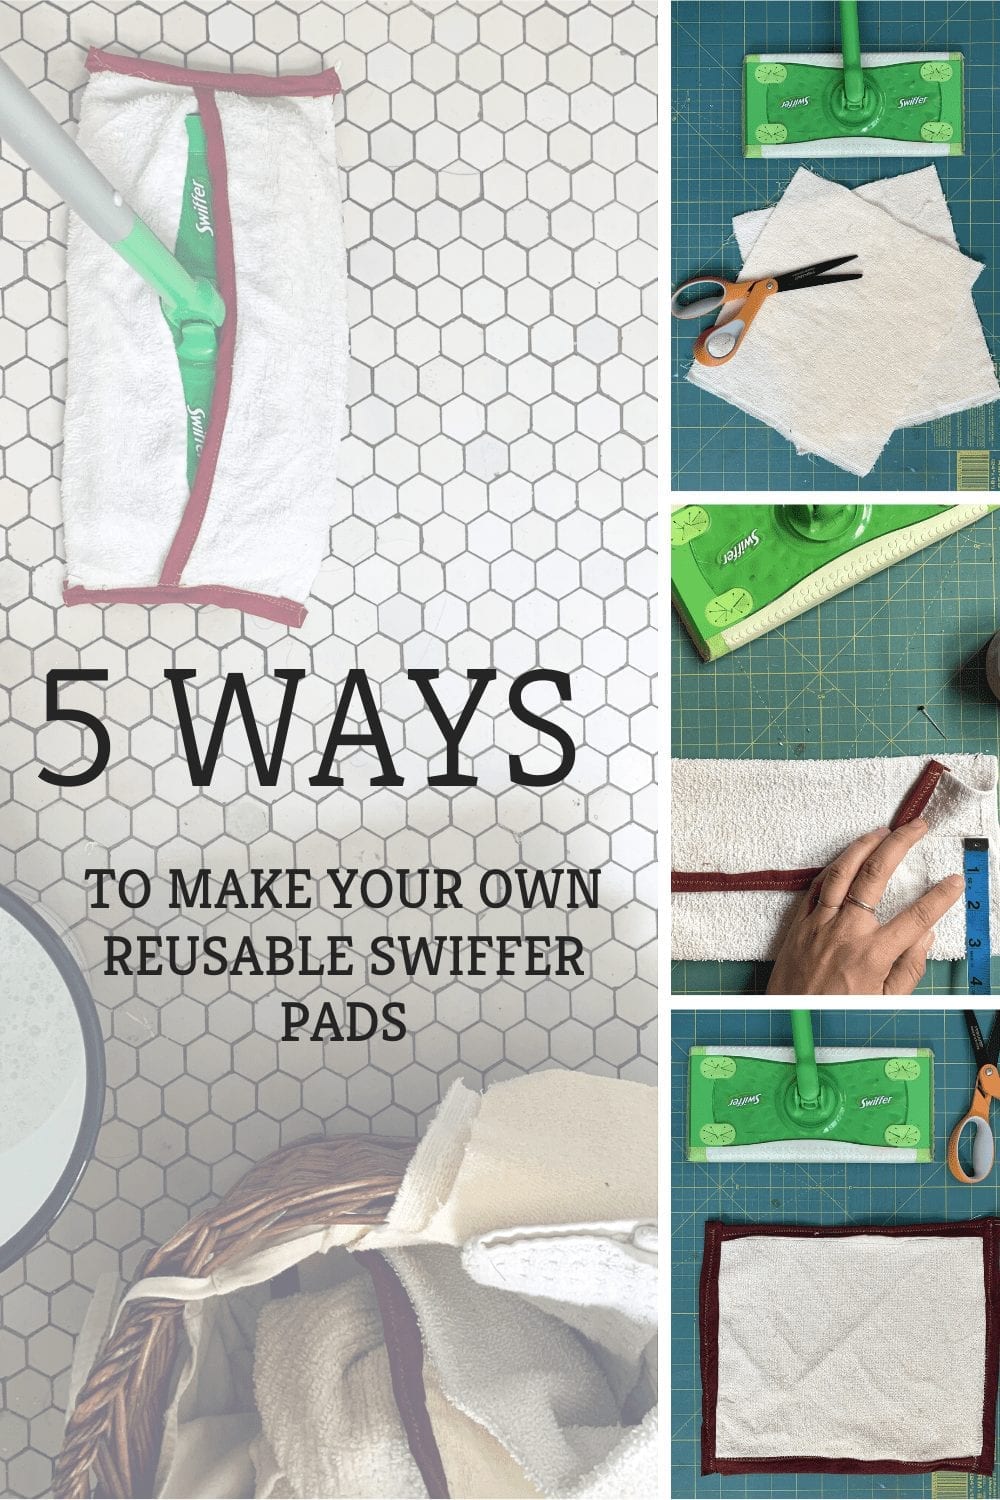 5 Ways to Make Your Own Reusable Swiffer Pads